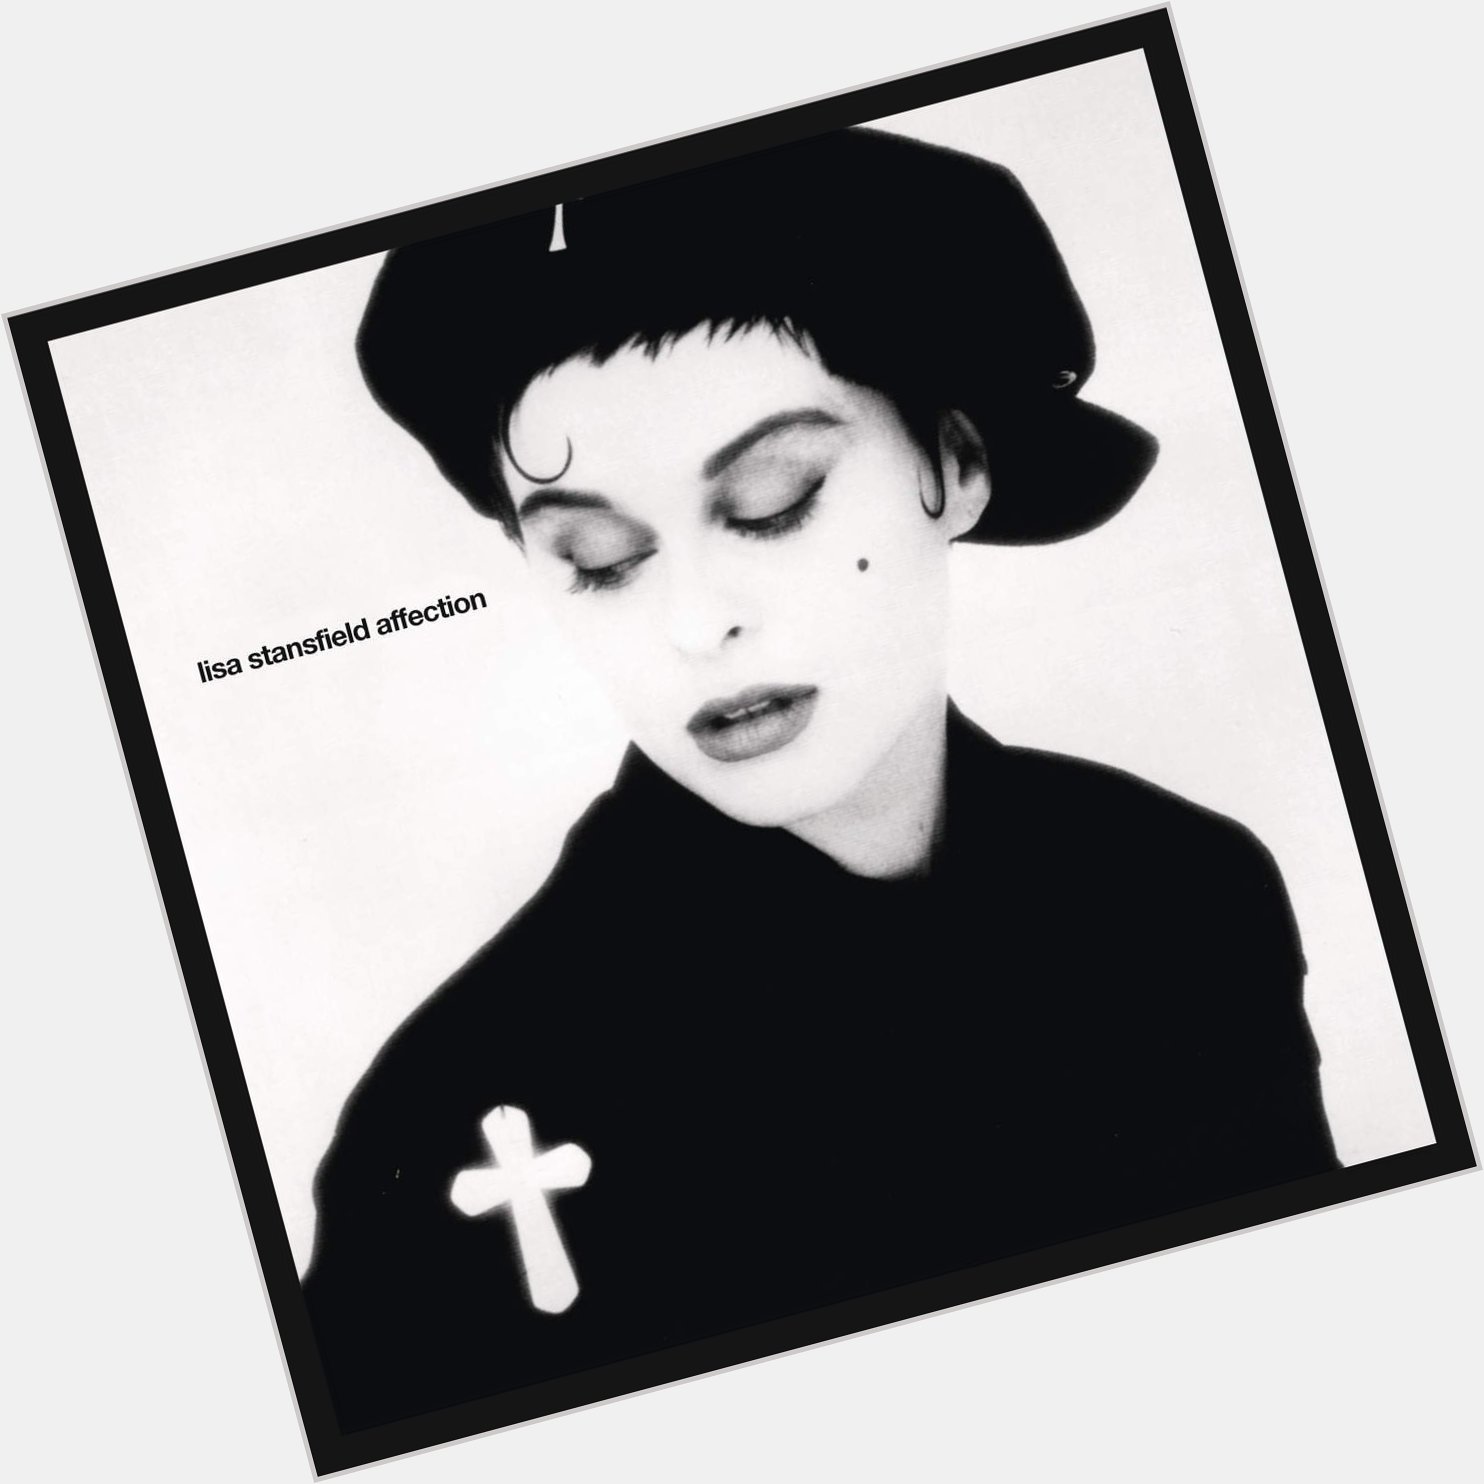  A Very Happy Birthday To Lisa Stansfield...Such A Great Album Such A Talented Singer!! 